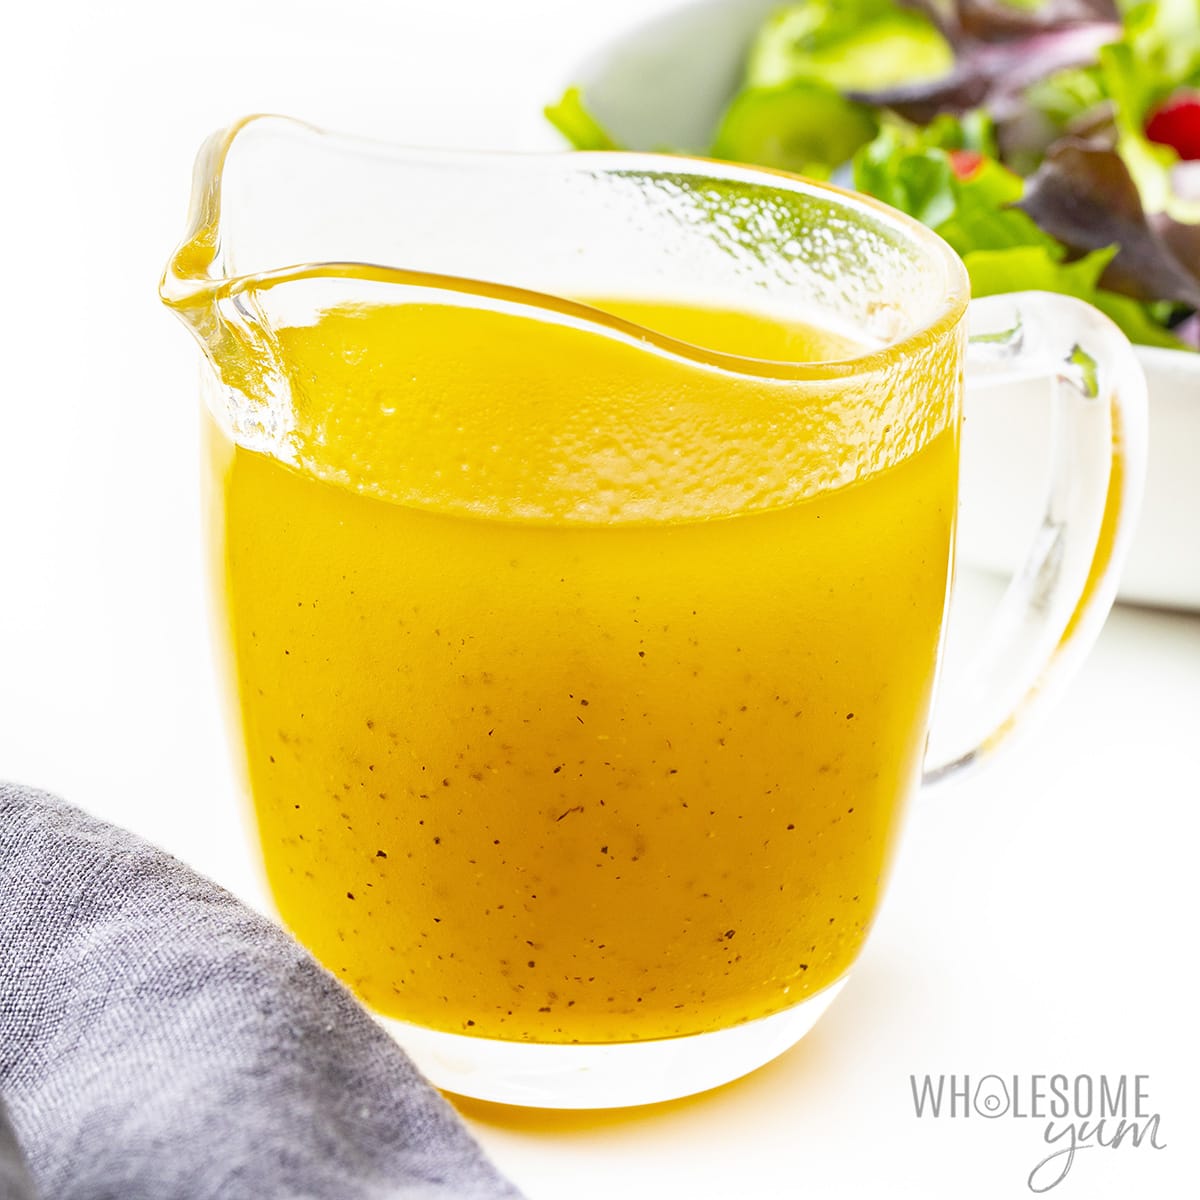 Sugar free salad dressing in small glass pitcher.